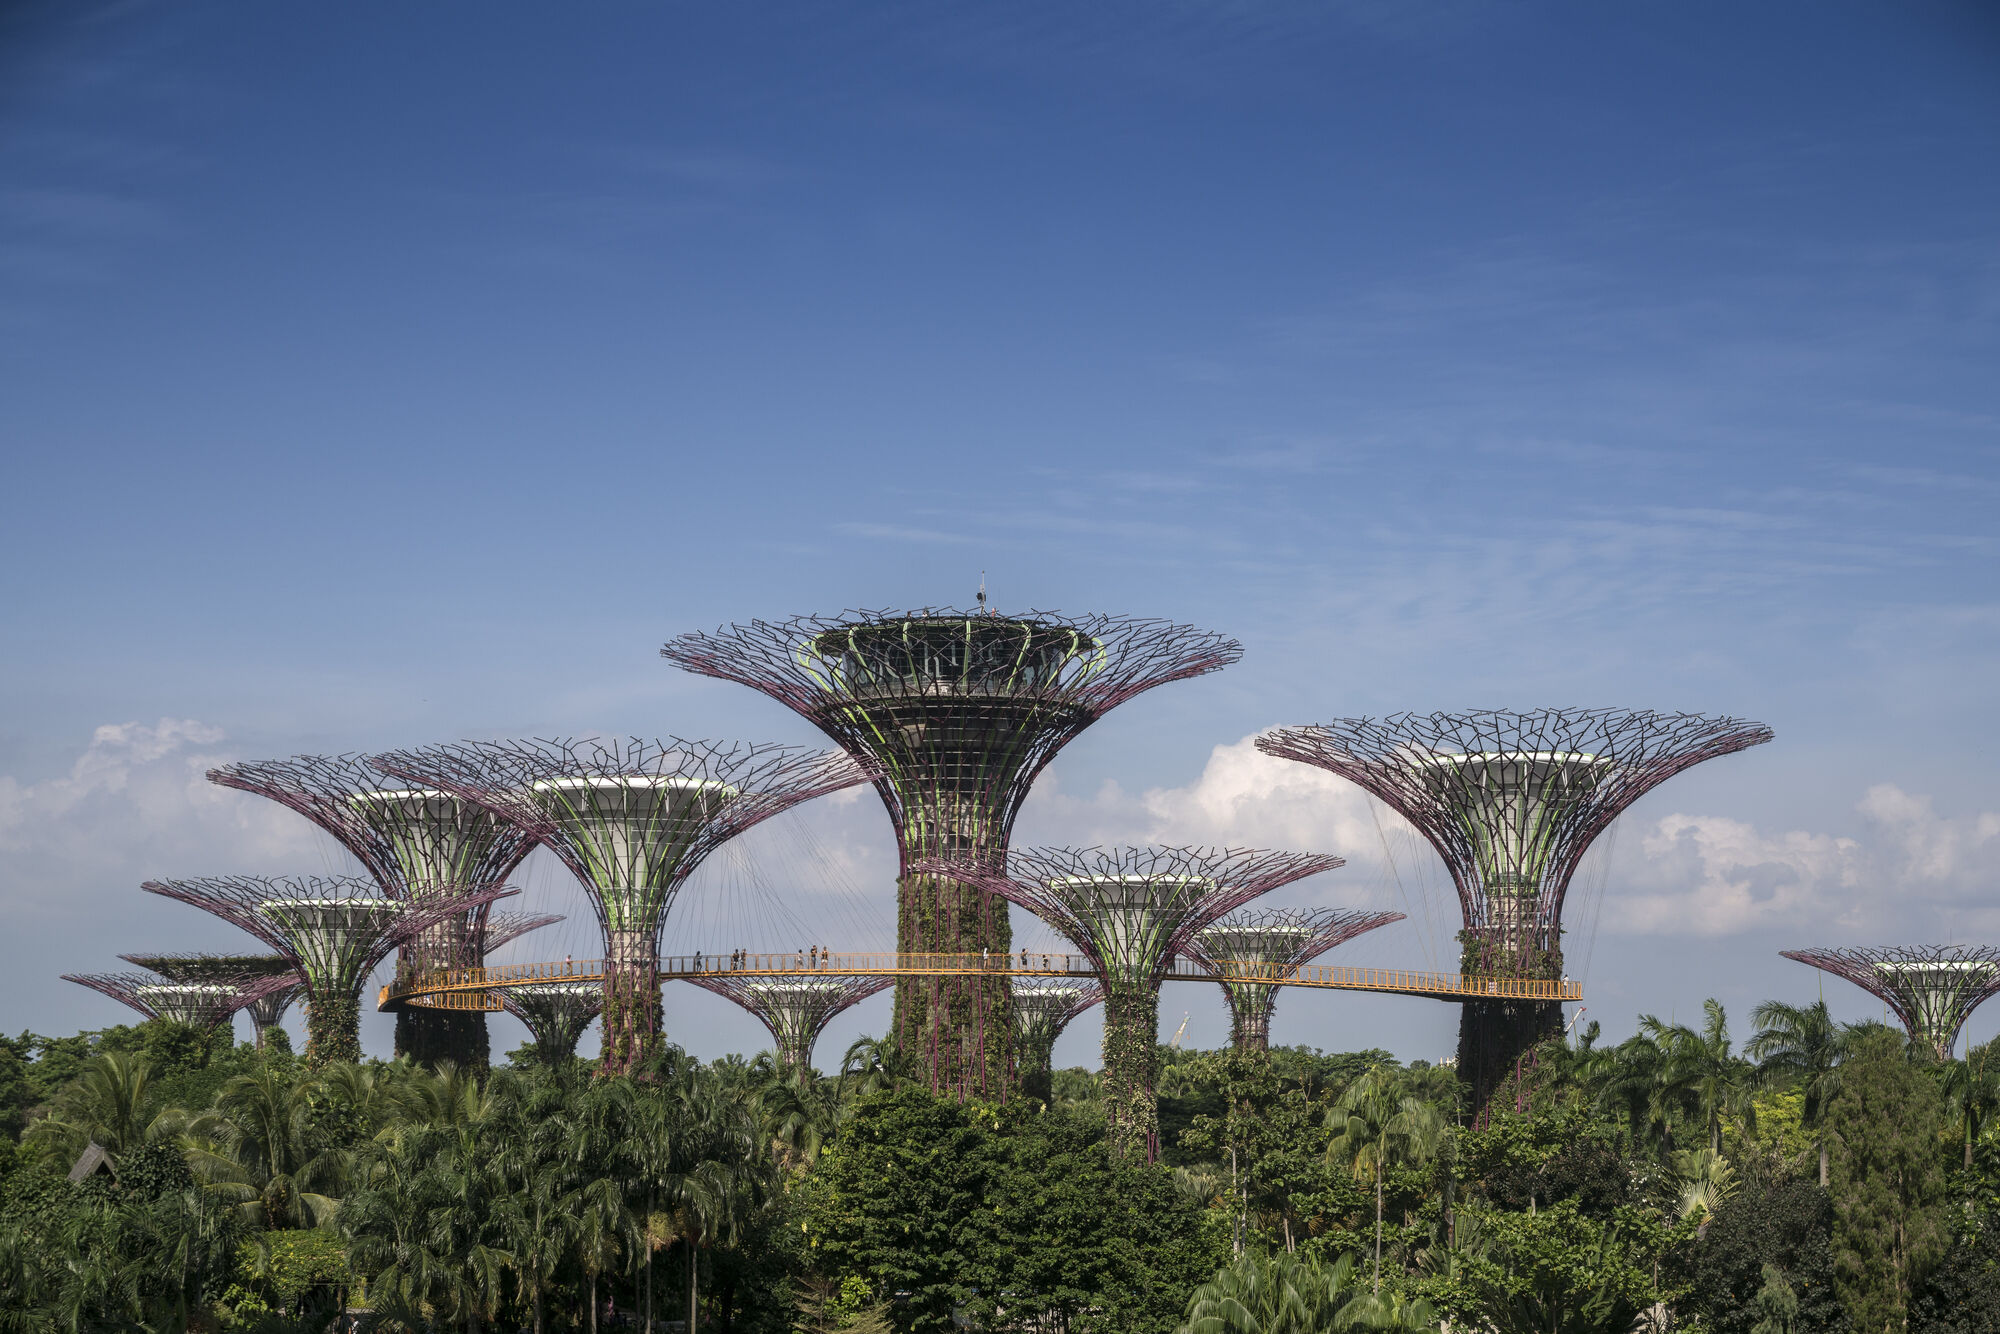 '10 Years of Growing Wonders' celebrates sizeable impact of Gardens by the Bay in Singapore